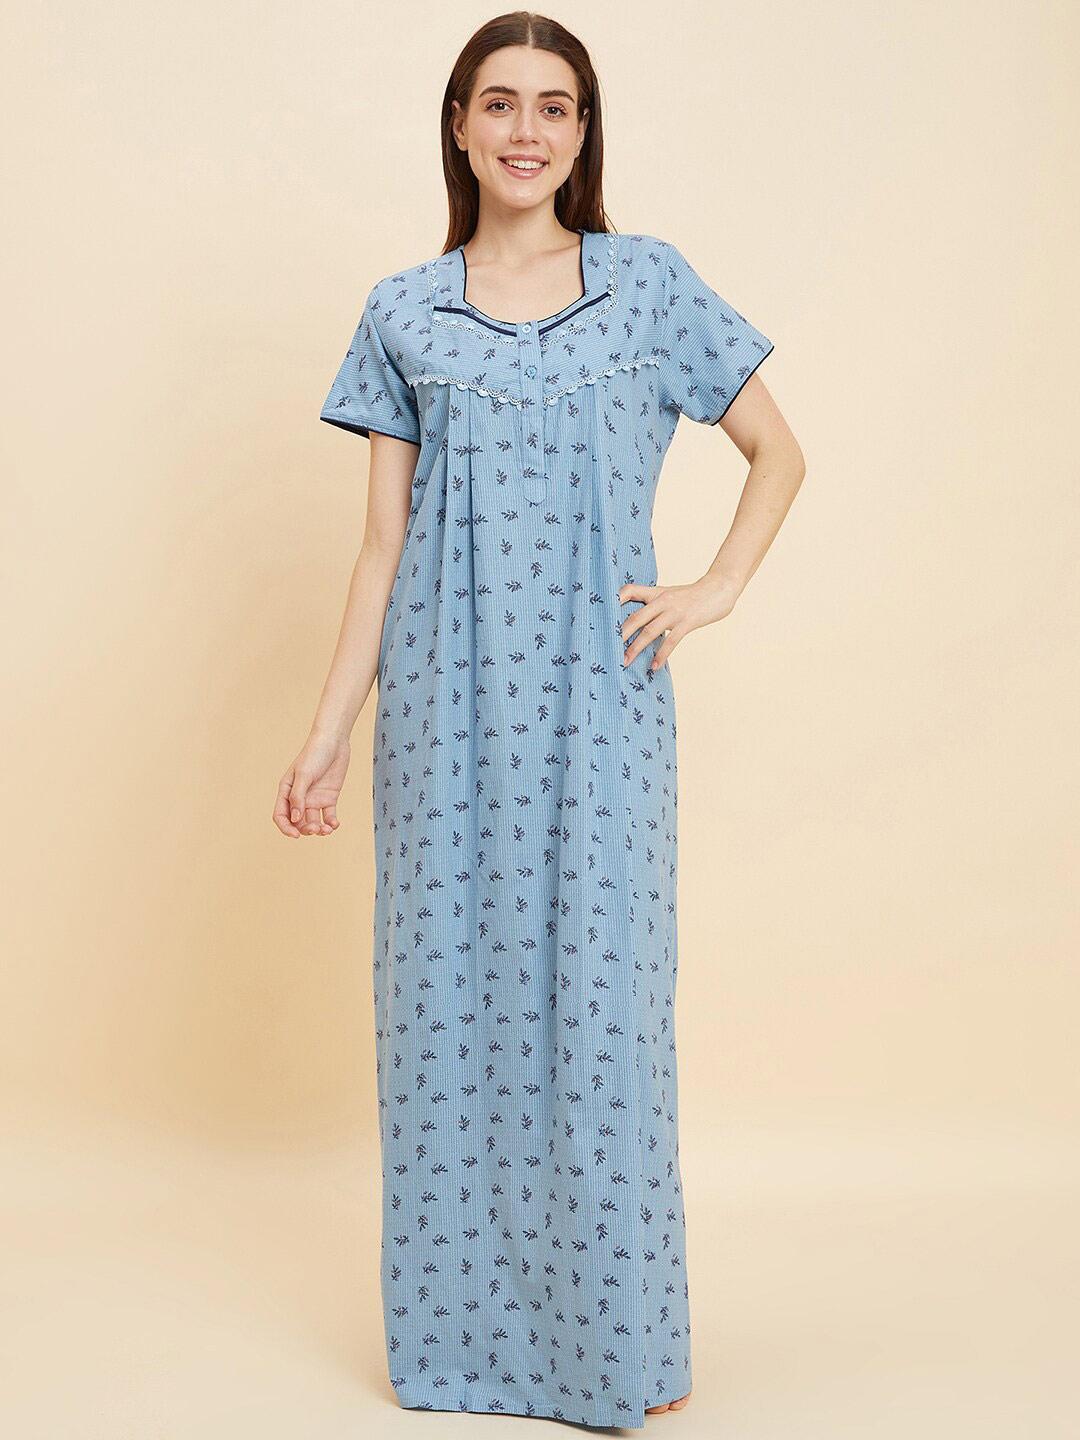 sweet-dreams-blue-floral-printed-pure-cotton-maxi-nightdress